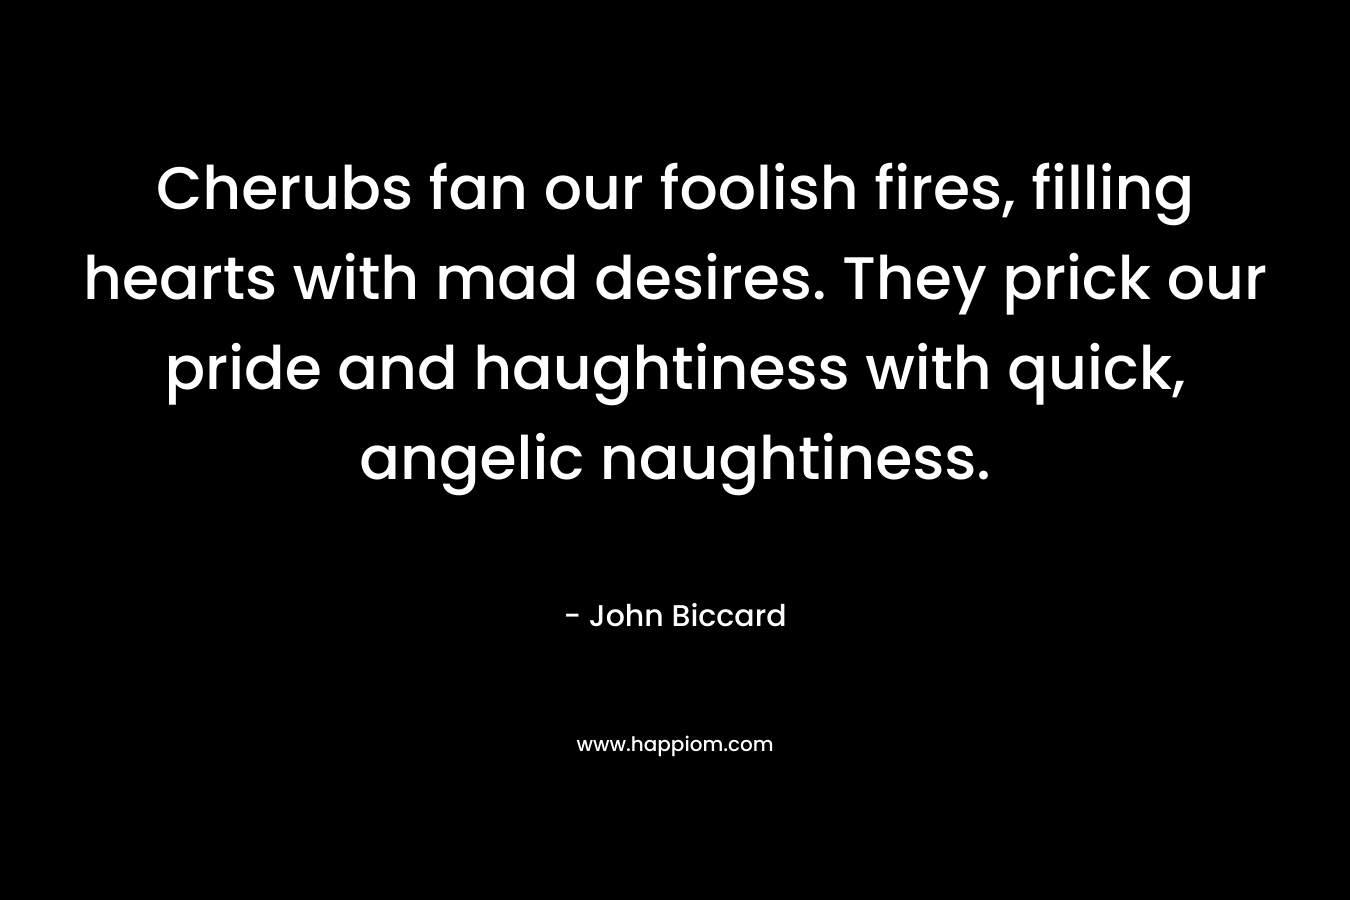 Cherubs fan our foolish fires, filling hearts with mad desires. They prick our pride and haughtiness with quick, angelic naughtiness. – John Biccard